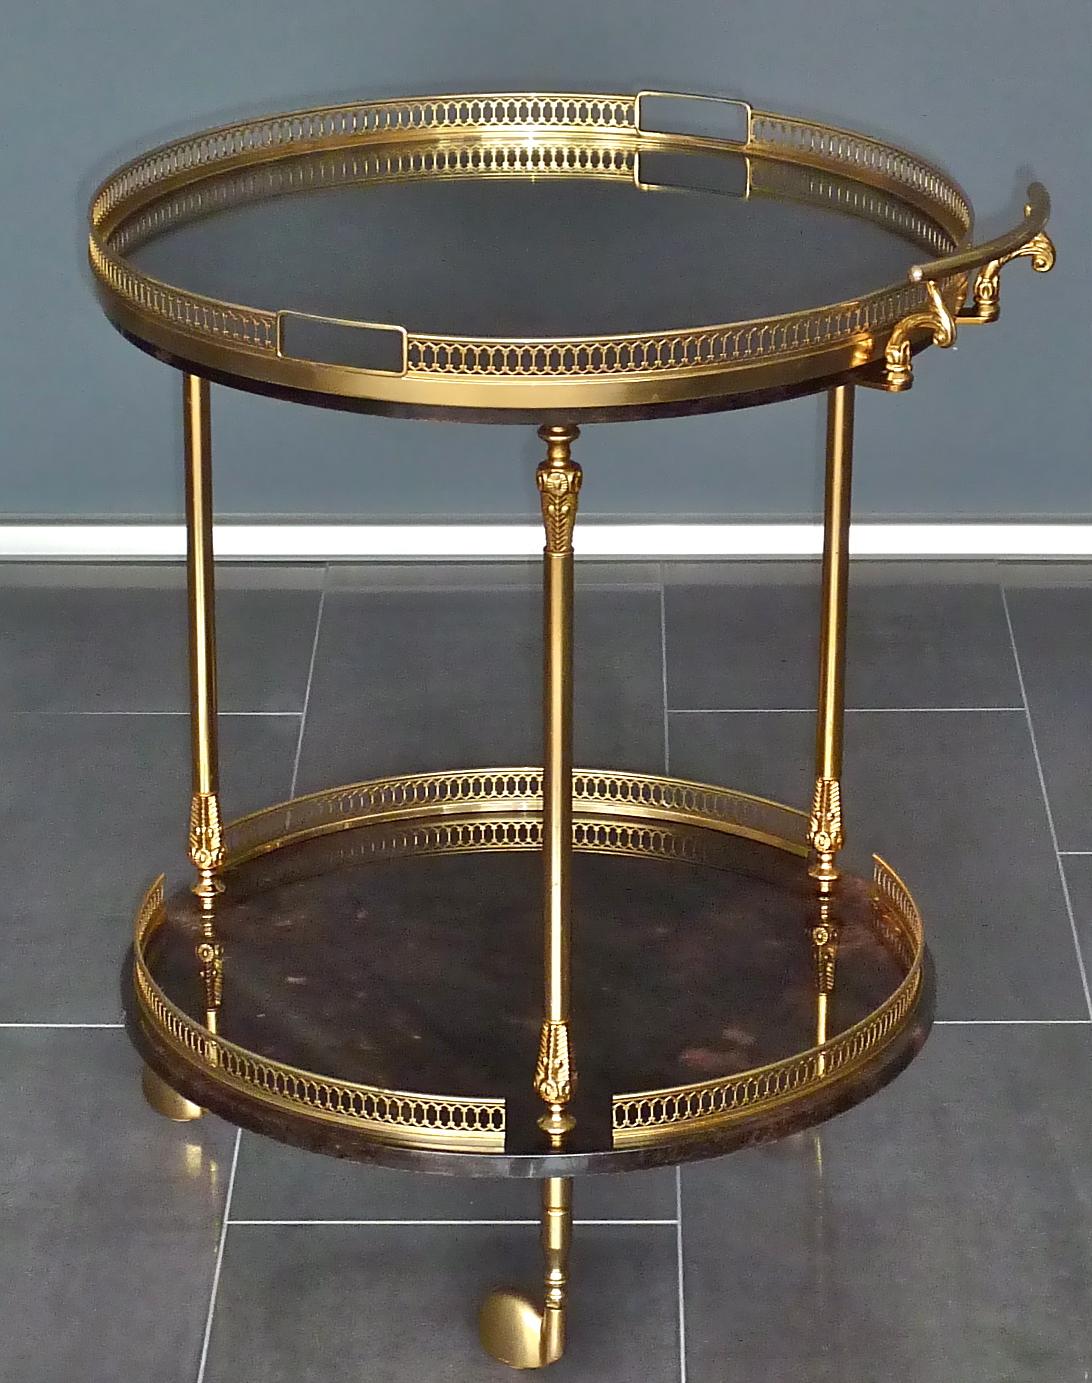 Noble and elegant Aldo Tura gilt brass serving table with tray, Italy around 1958. Made of dark brown to lighter brown color, partially pinkish spots lacquered and dyed goatskin or parchment this 2-tier bar cart or drinks trolley on three castors